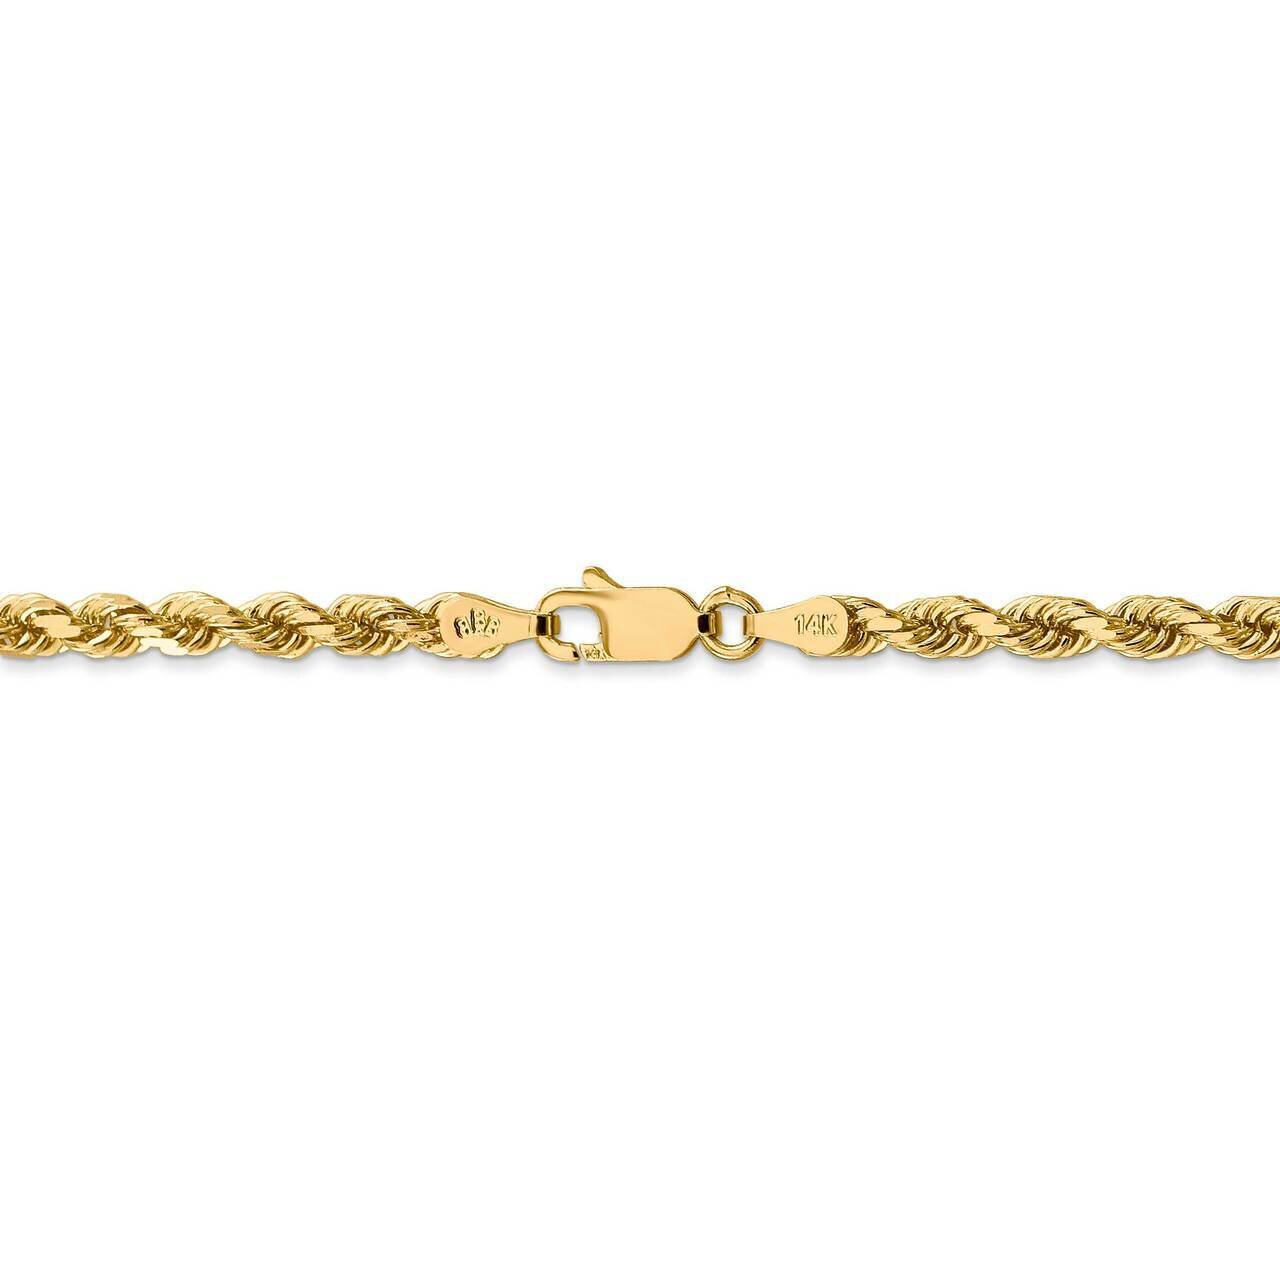 28 Inch 3.5mm Diamond-cut Rope with Lobster Clasp Chain 14k Yellow Gold 025L-28